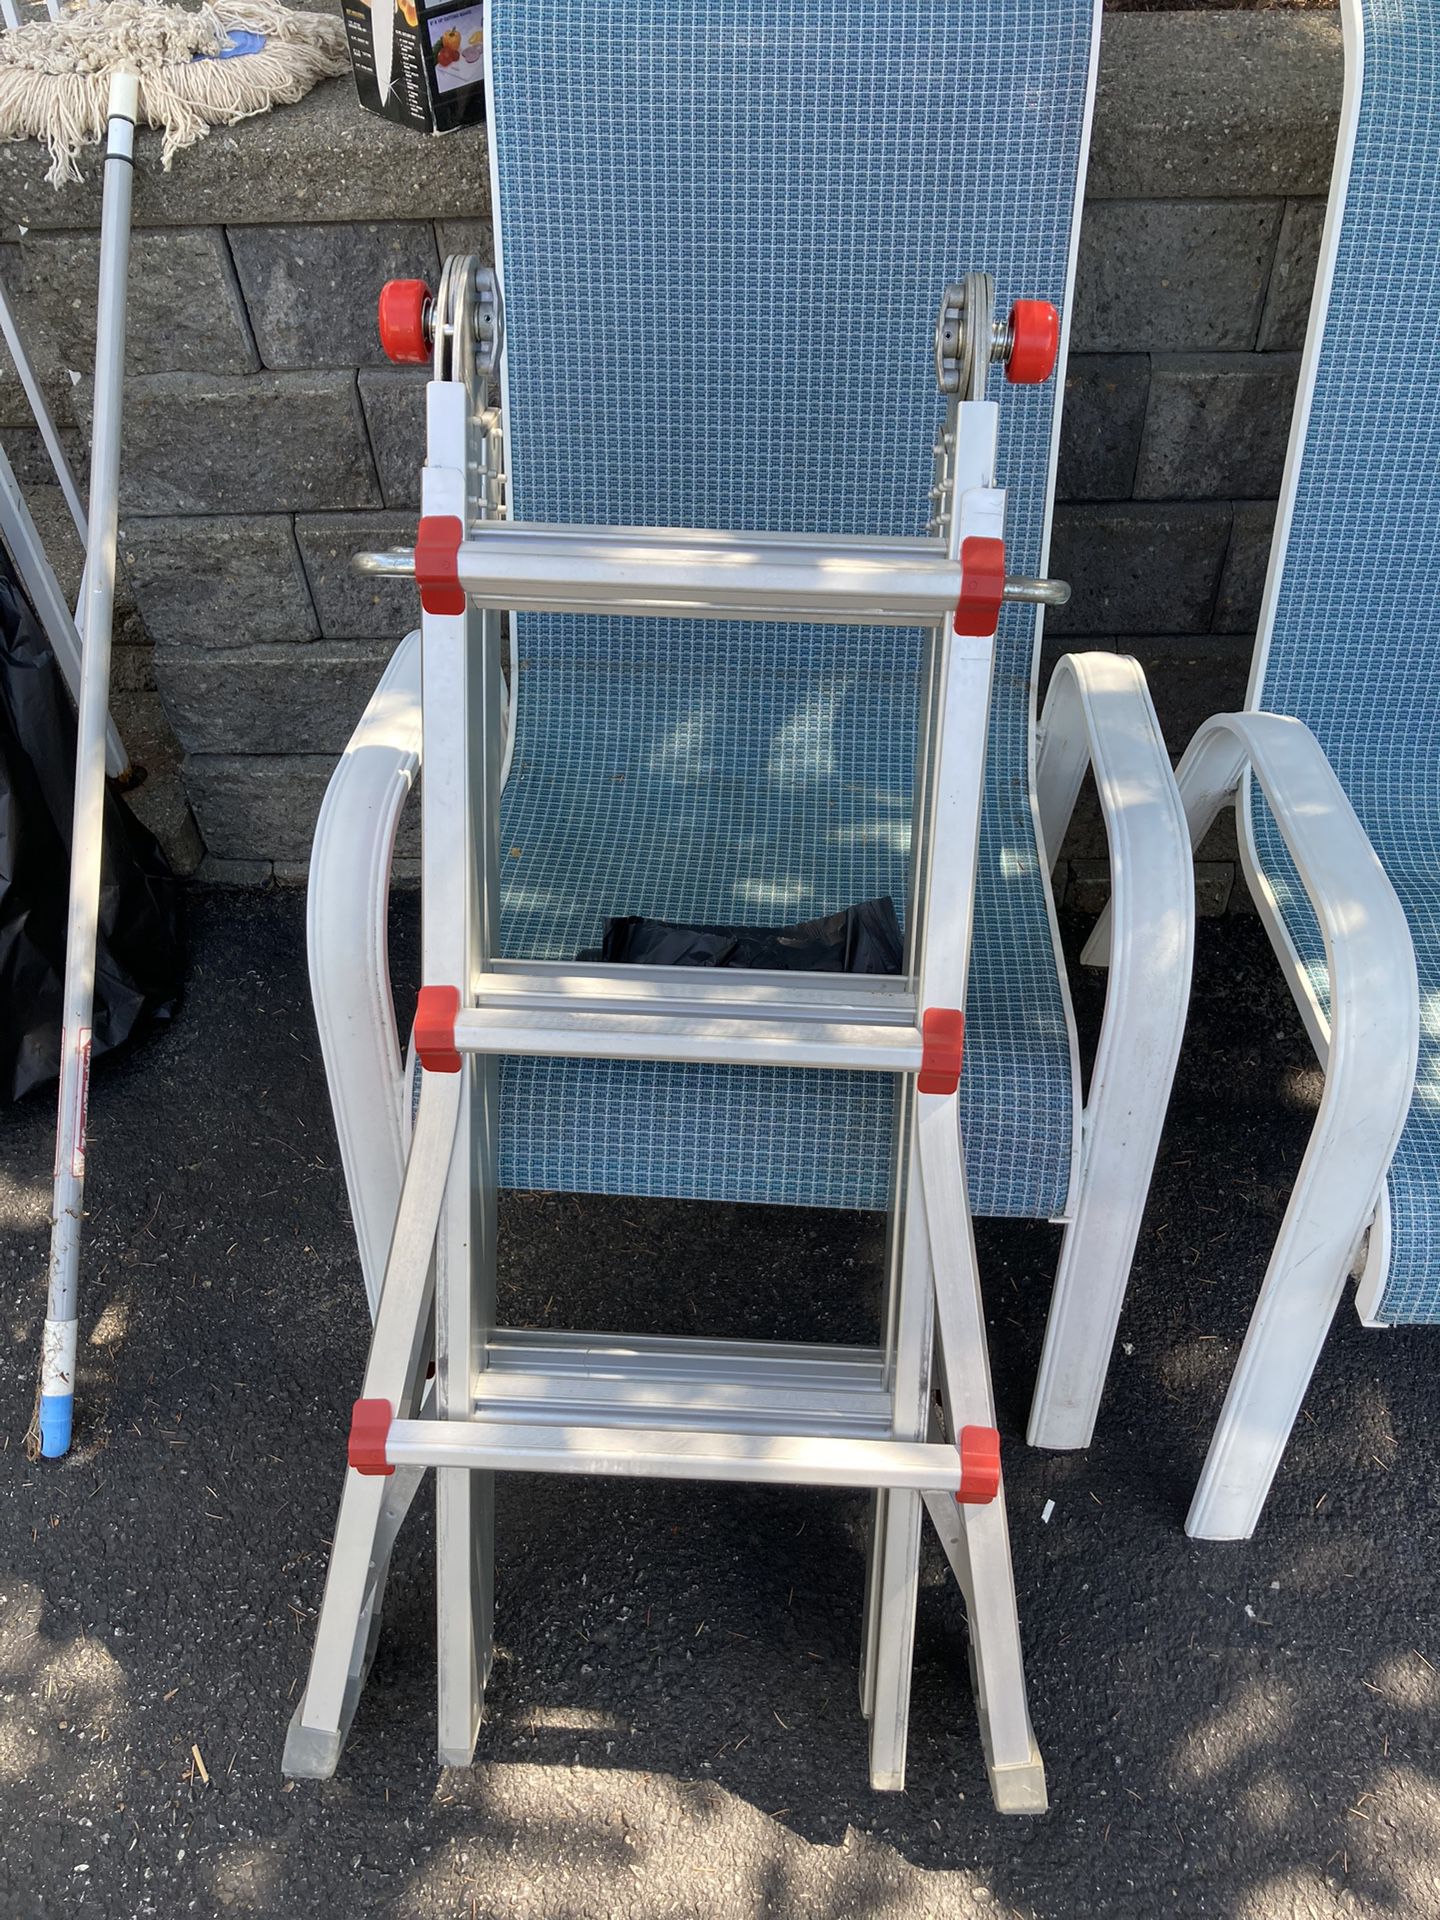 Titan Ladder, Brand New In Box, Never Used